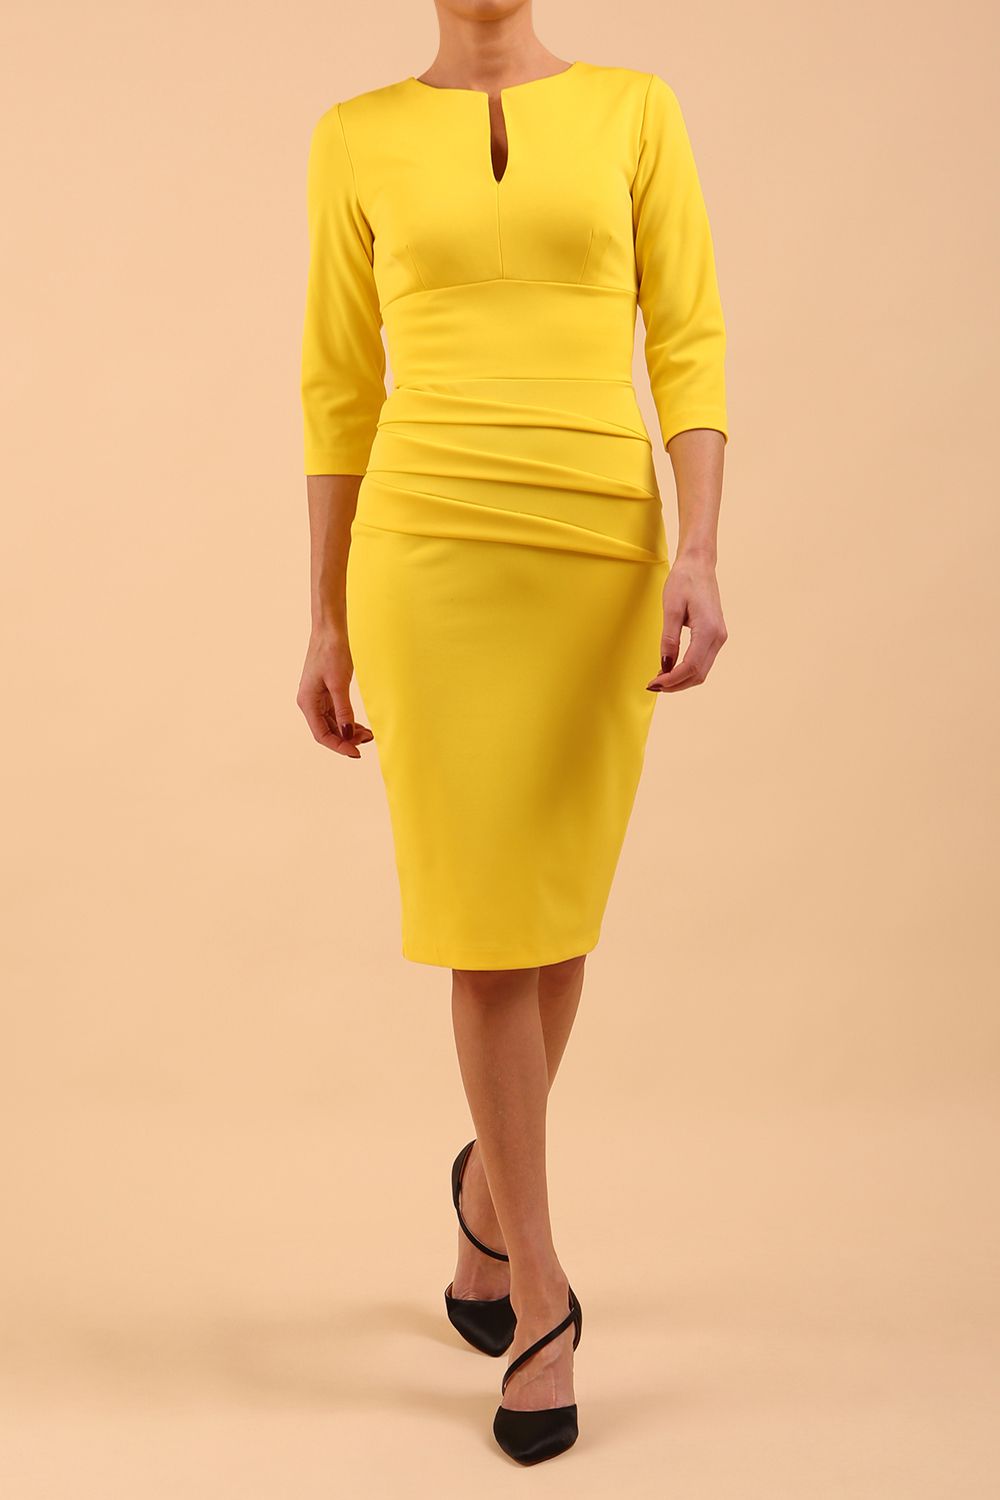 Model wearing Diva catwalk Daphne ¾ Sleeved pencil-skirt dress with pleat detail across the hips and ¾ sleeve length in blazing yellow front